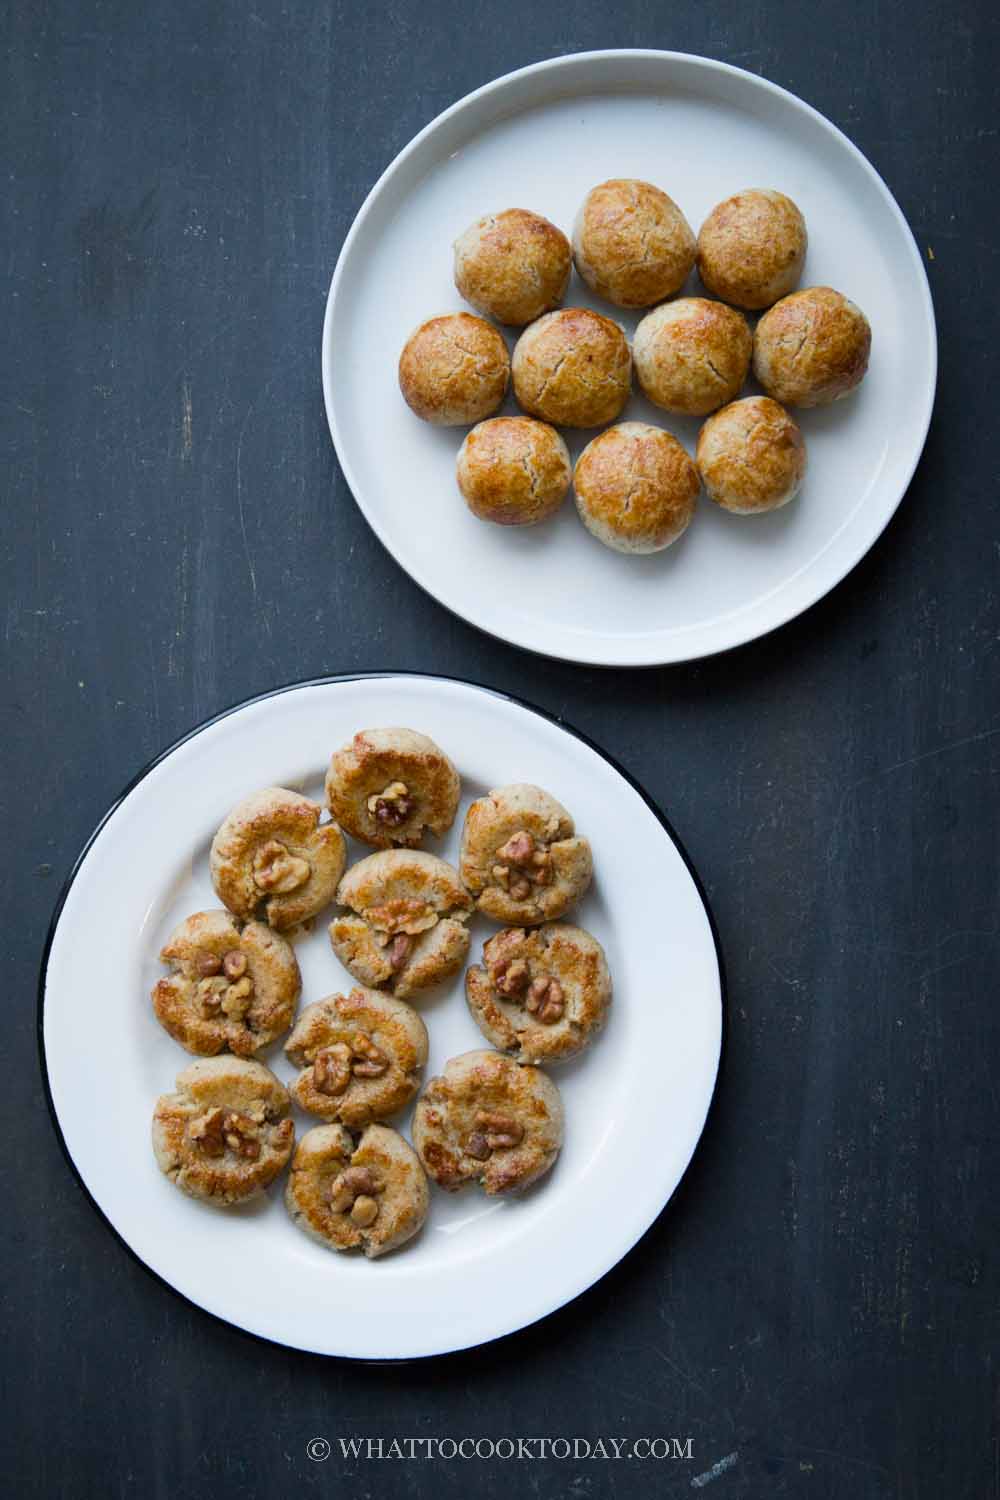 Hup Toh Soh (Old-fashioned Chinese Walnut Biscuits)